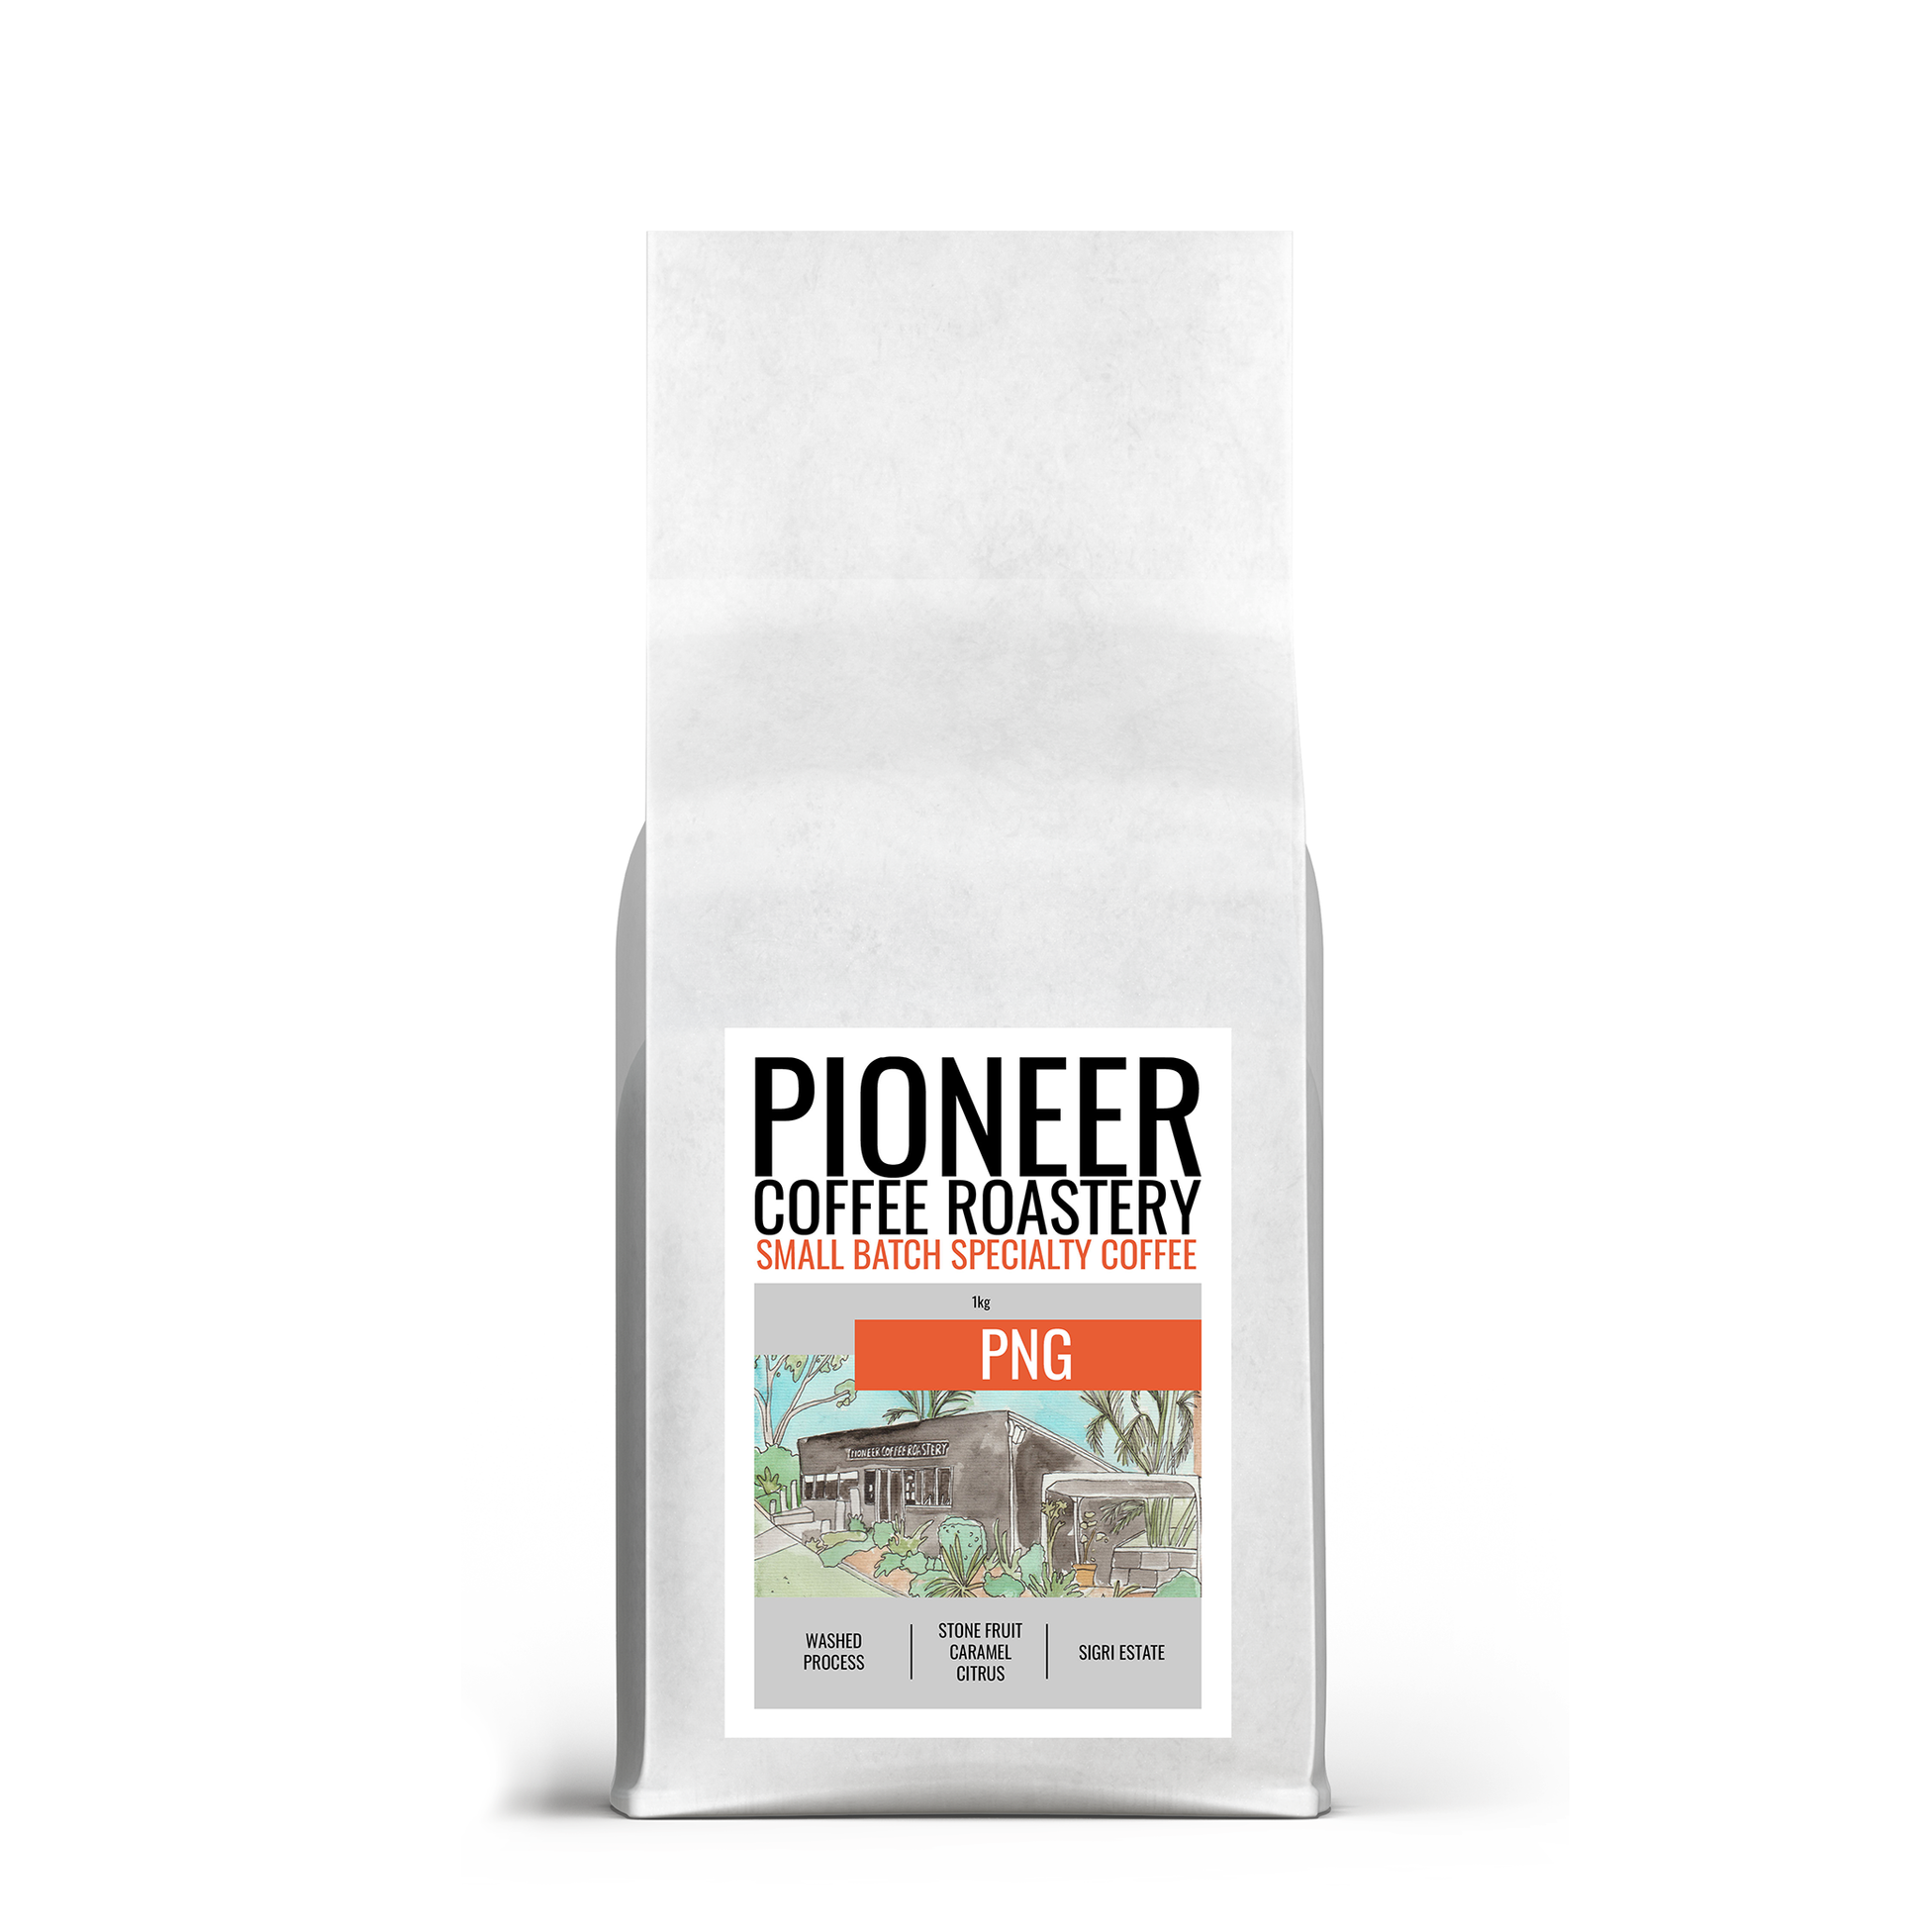 A 1KG BAG OF PNG COFFEE BEANS